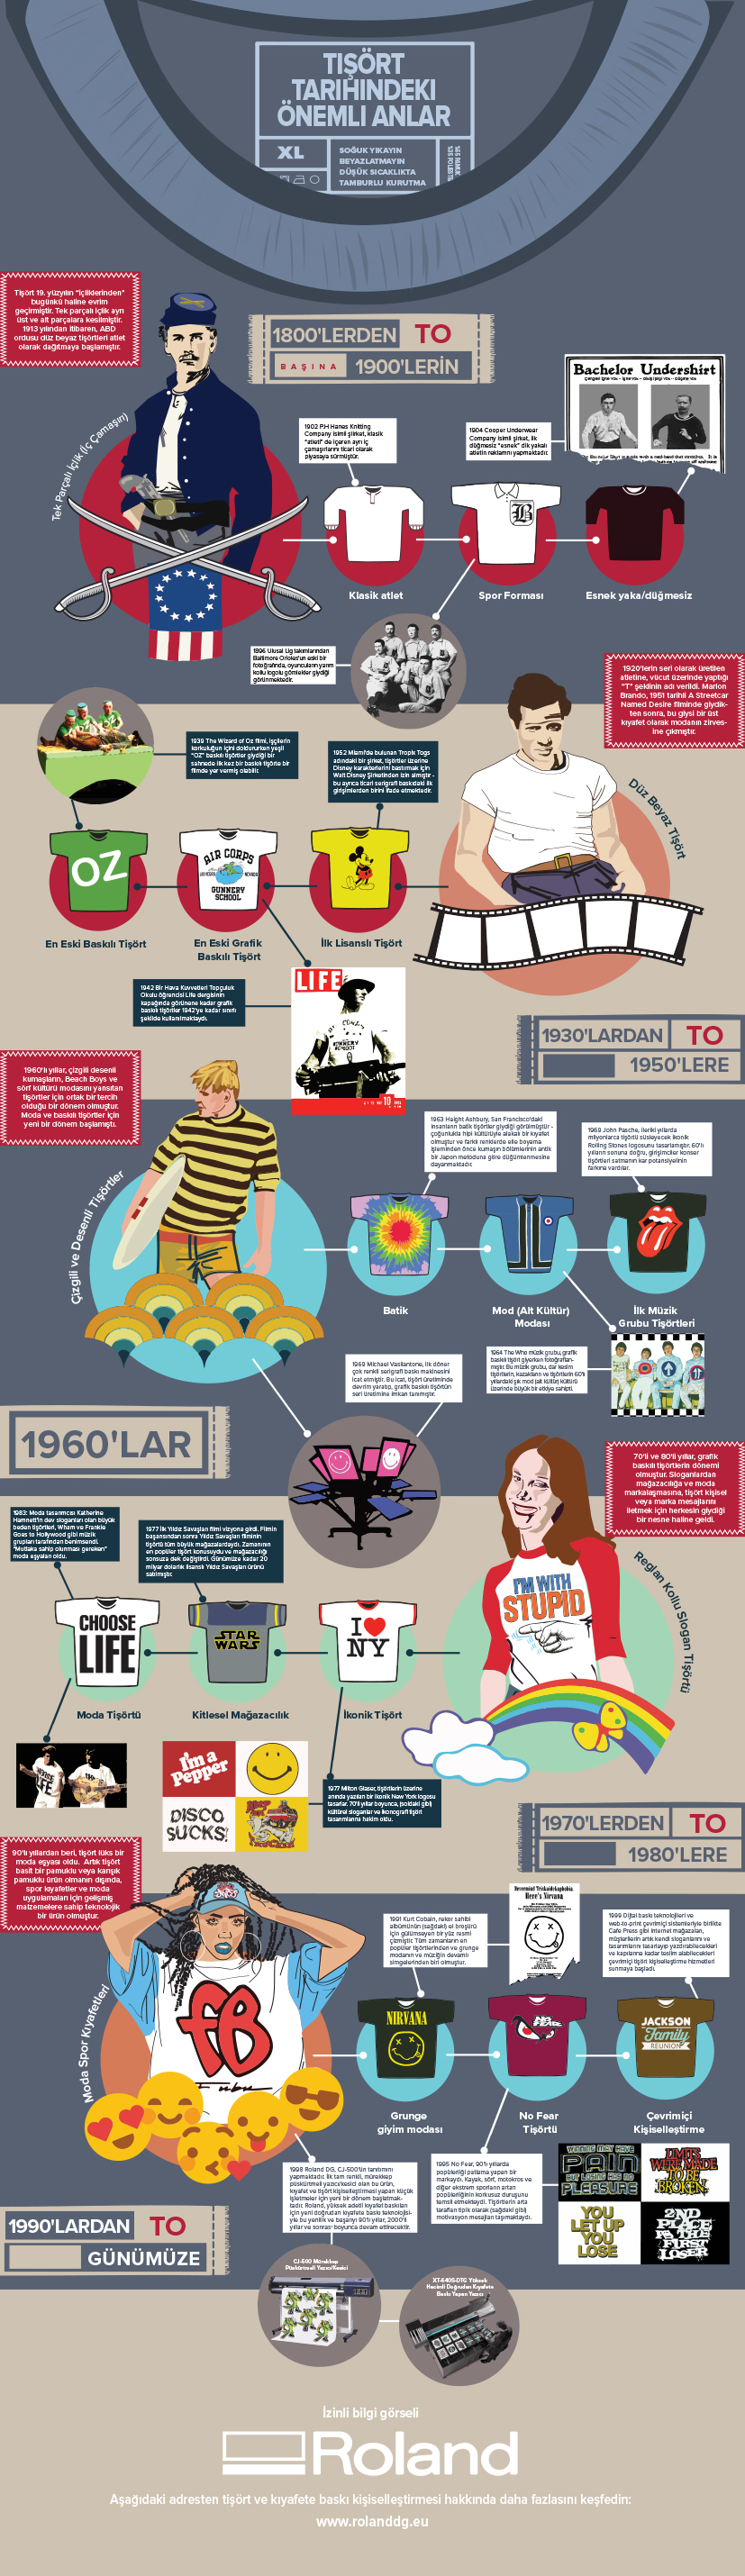 History of the t-shirt